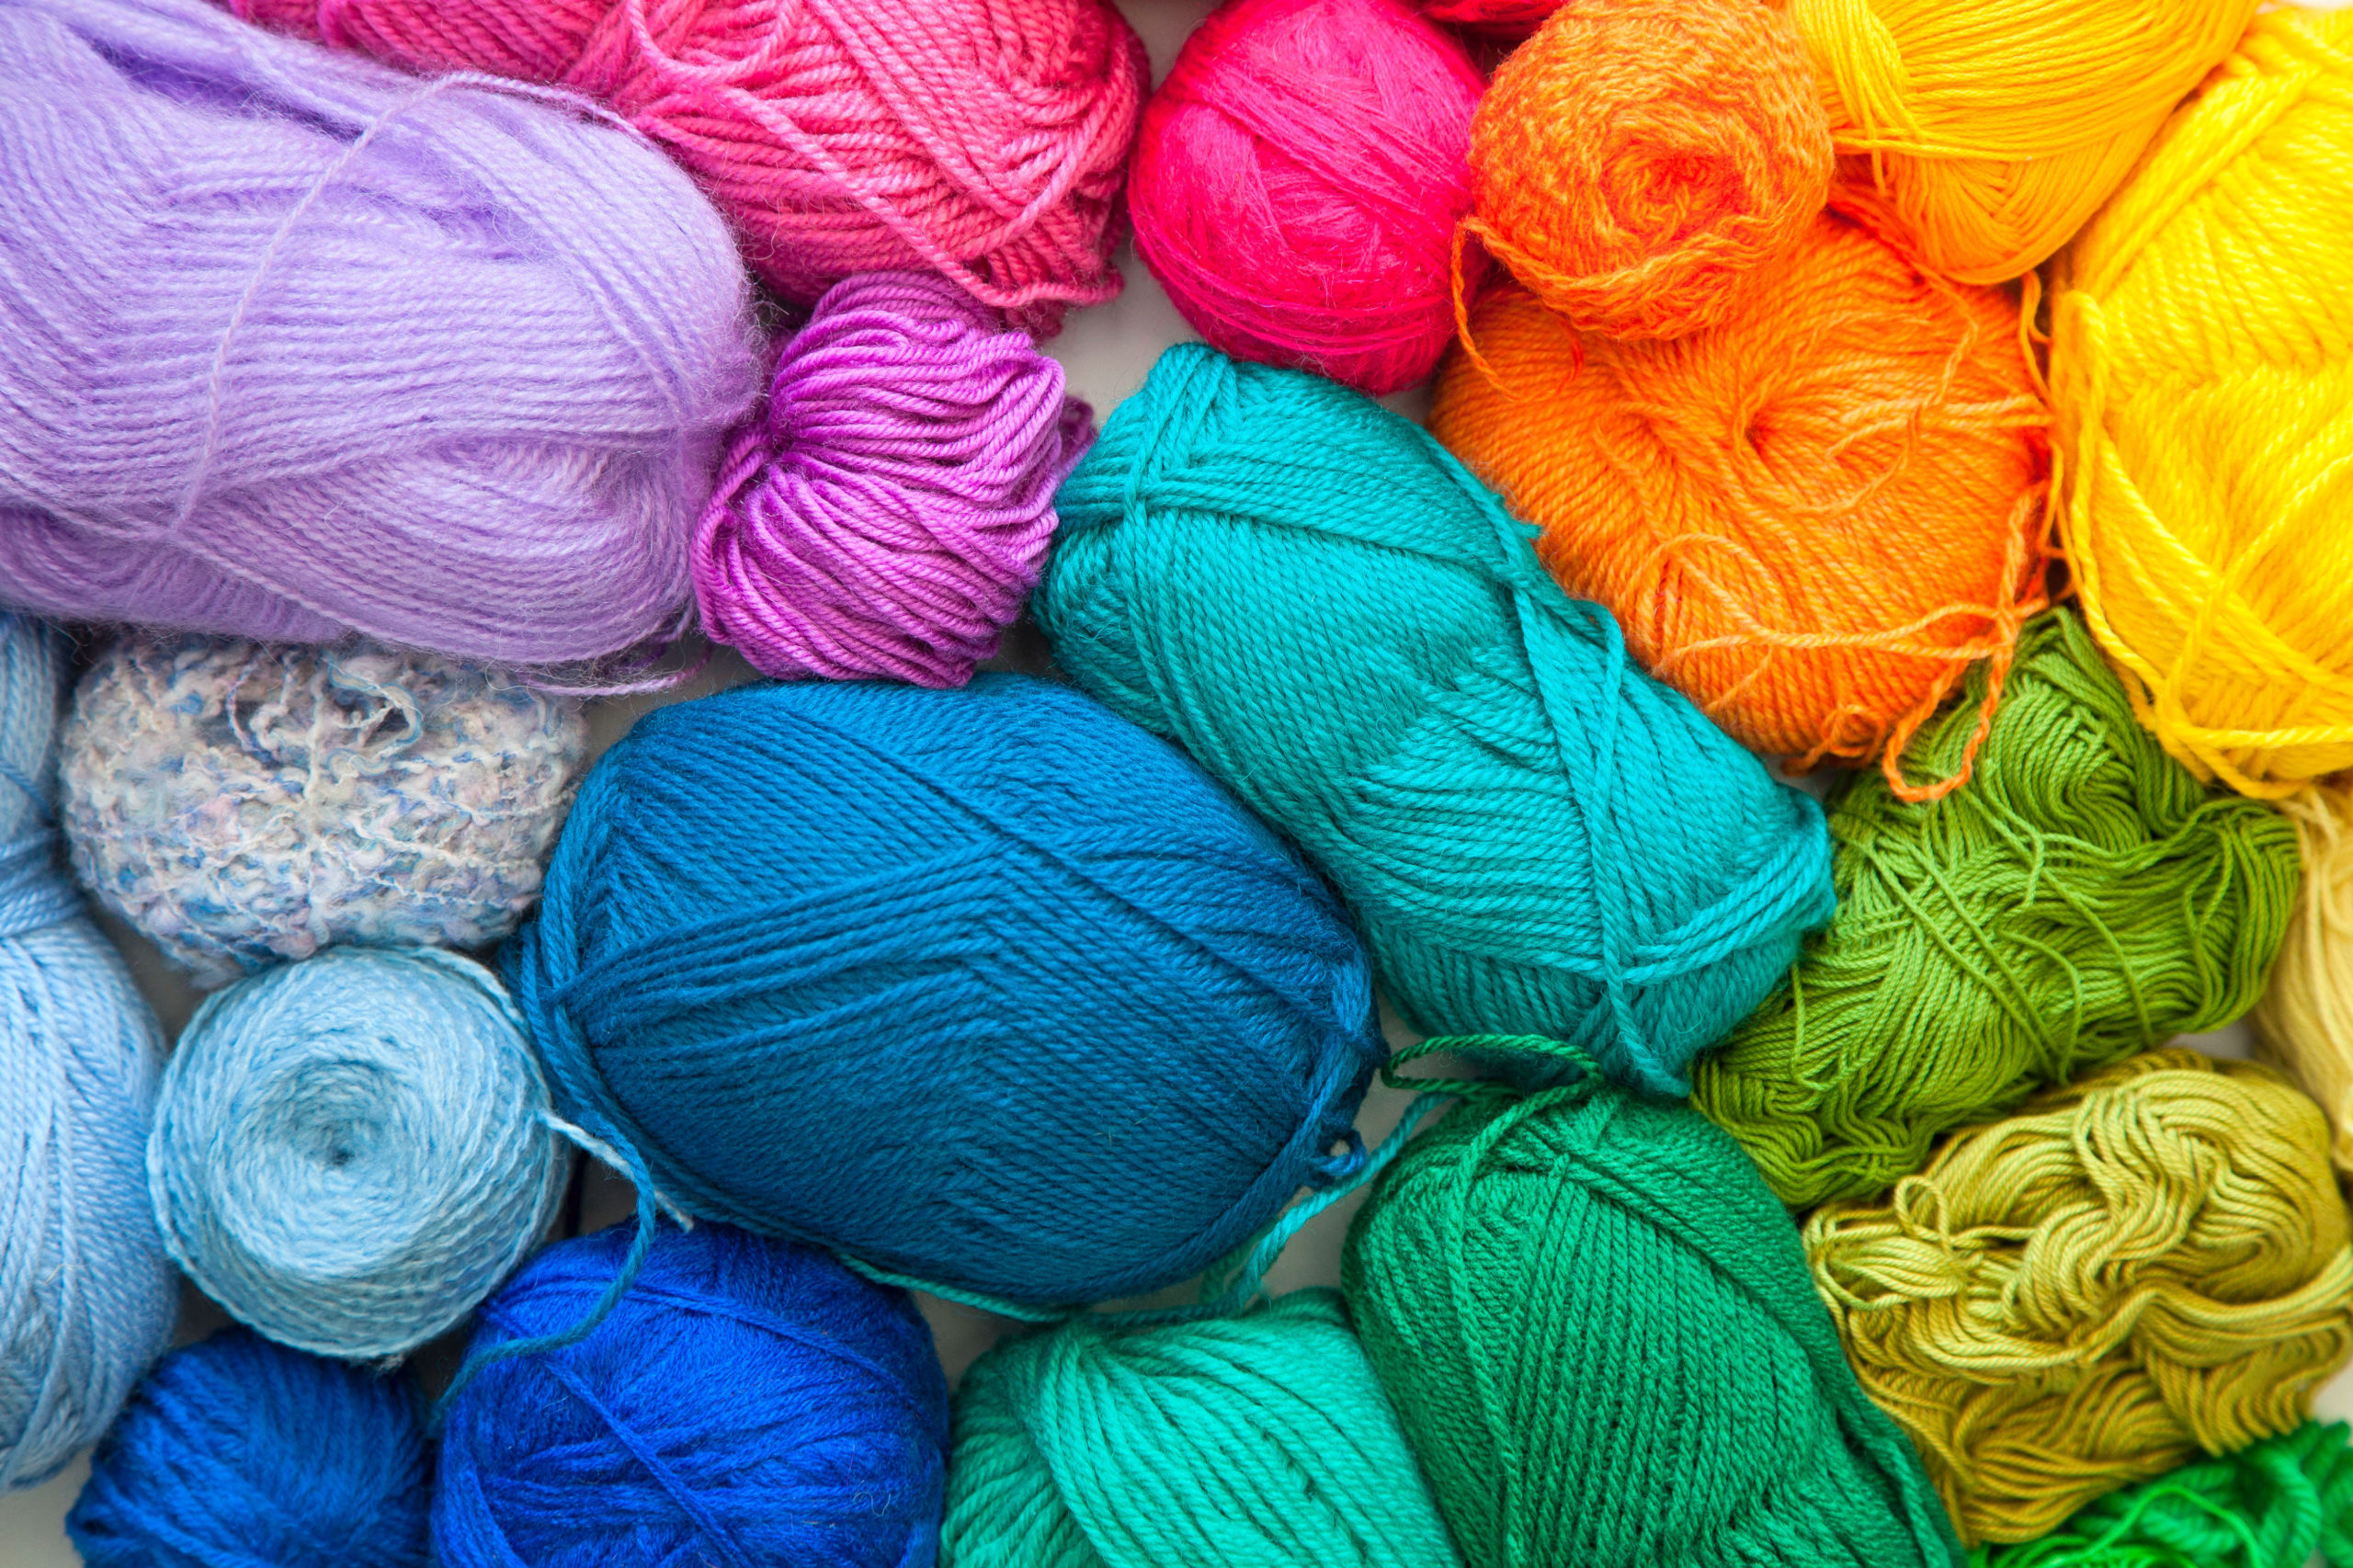 The 12 Best Crocheted Items to Make at Home for a Profit